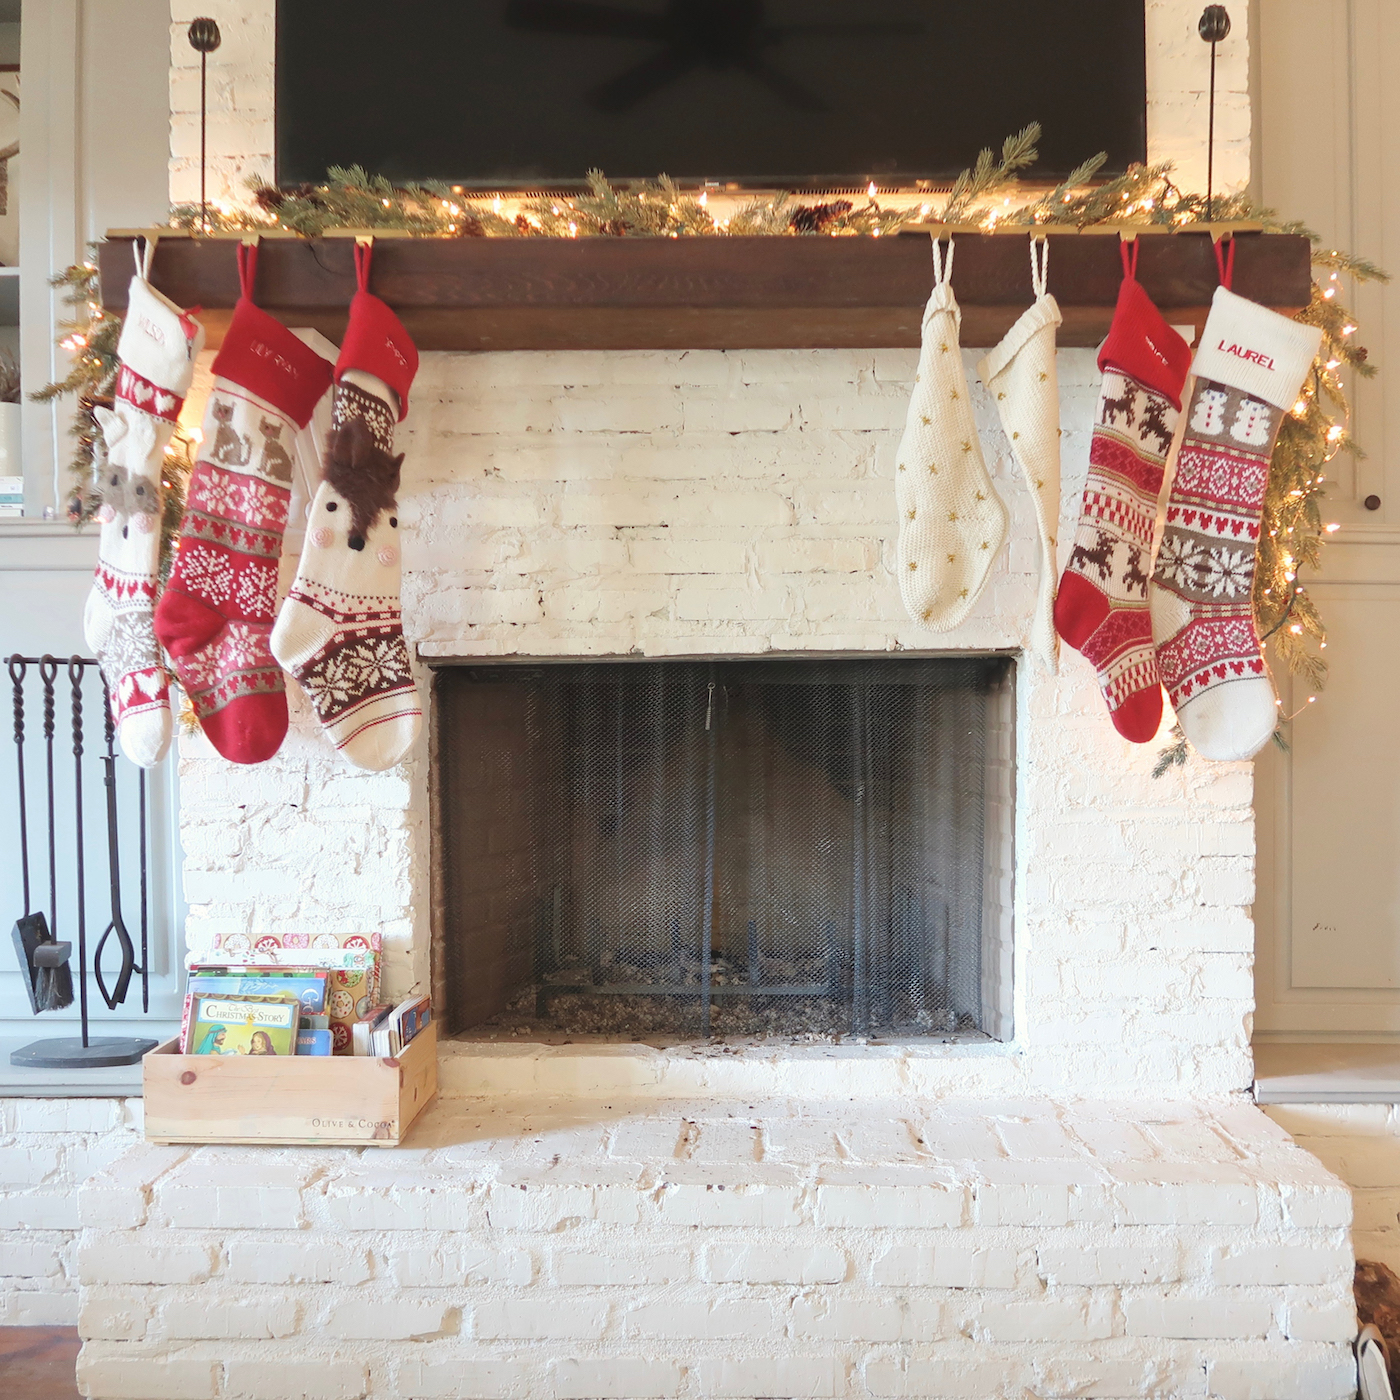 Stockings are hung by the chimney with care!